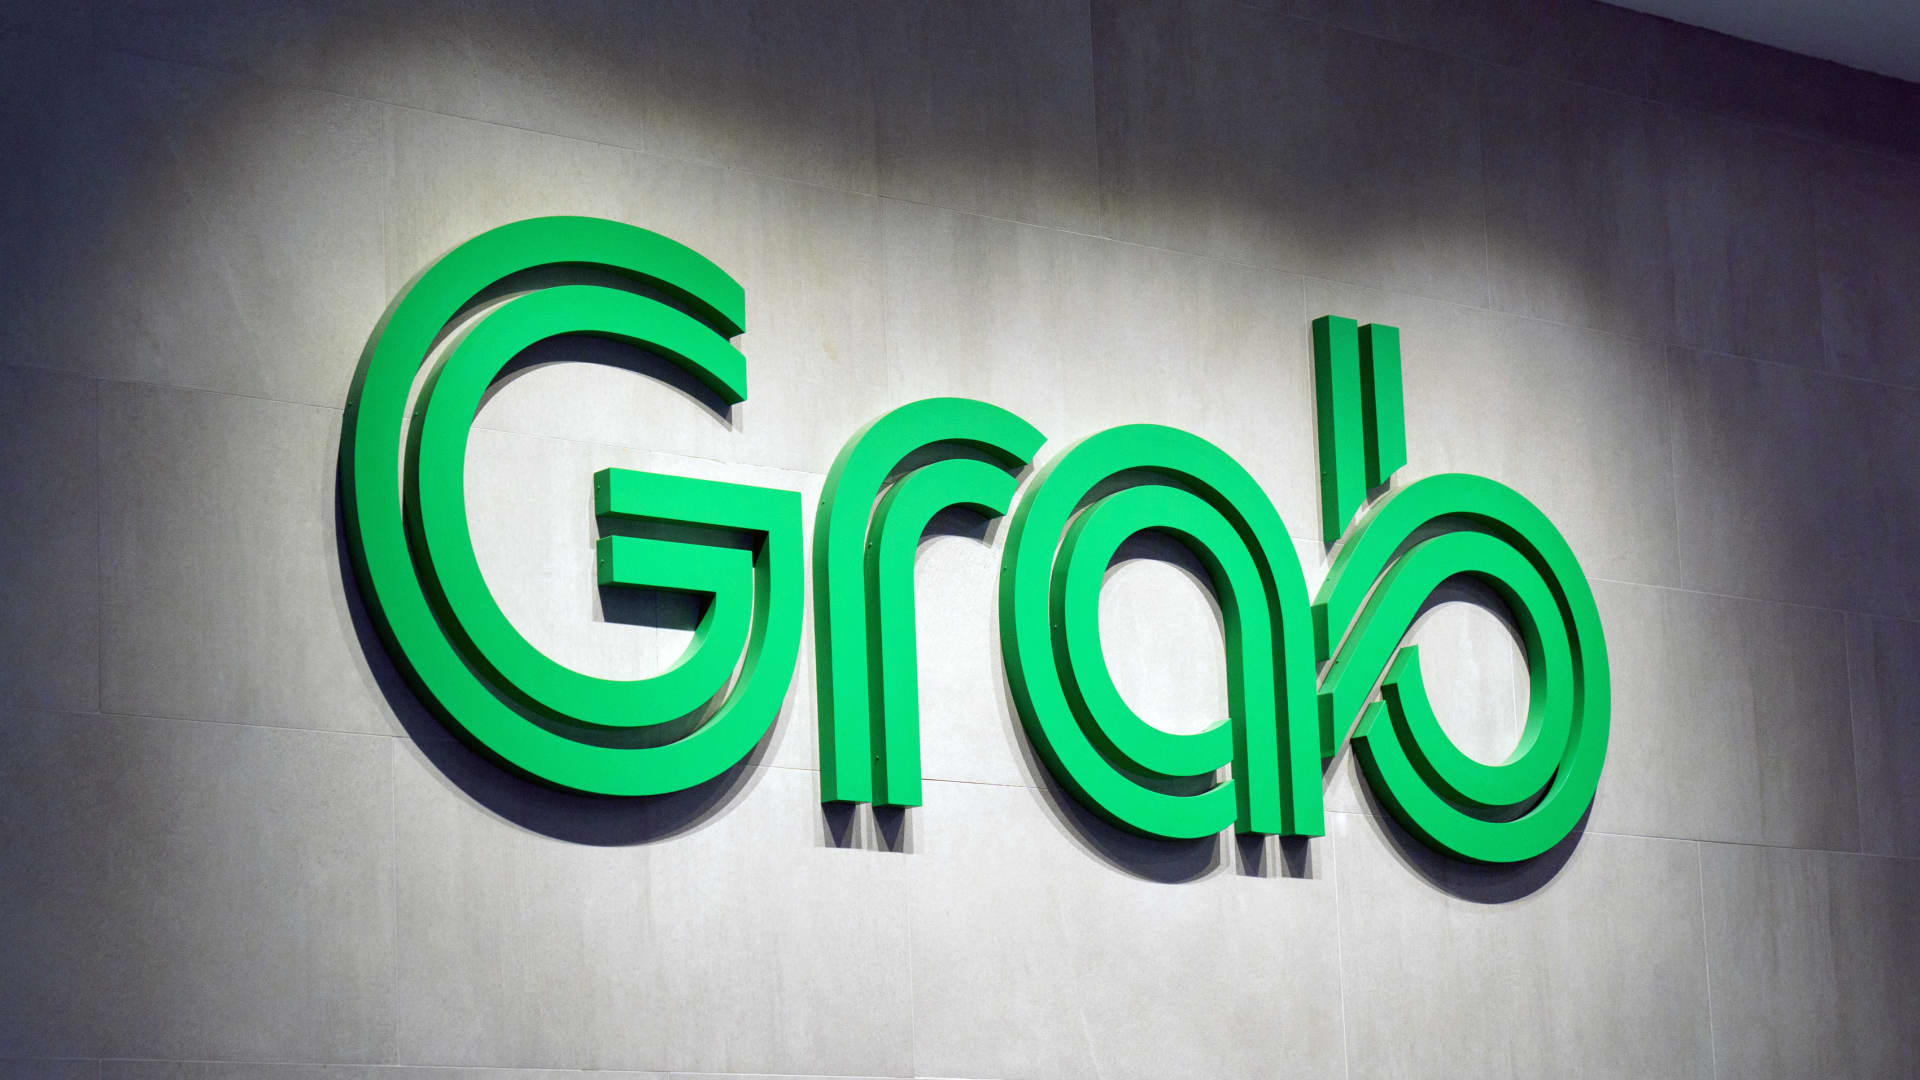 Grab ride-hailing unit on track to hit pre-Covid levels by end 2023